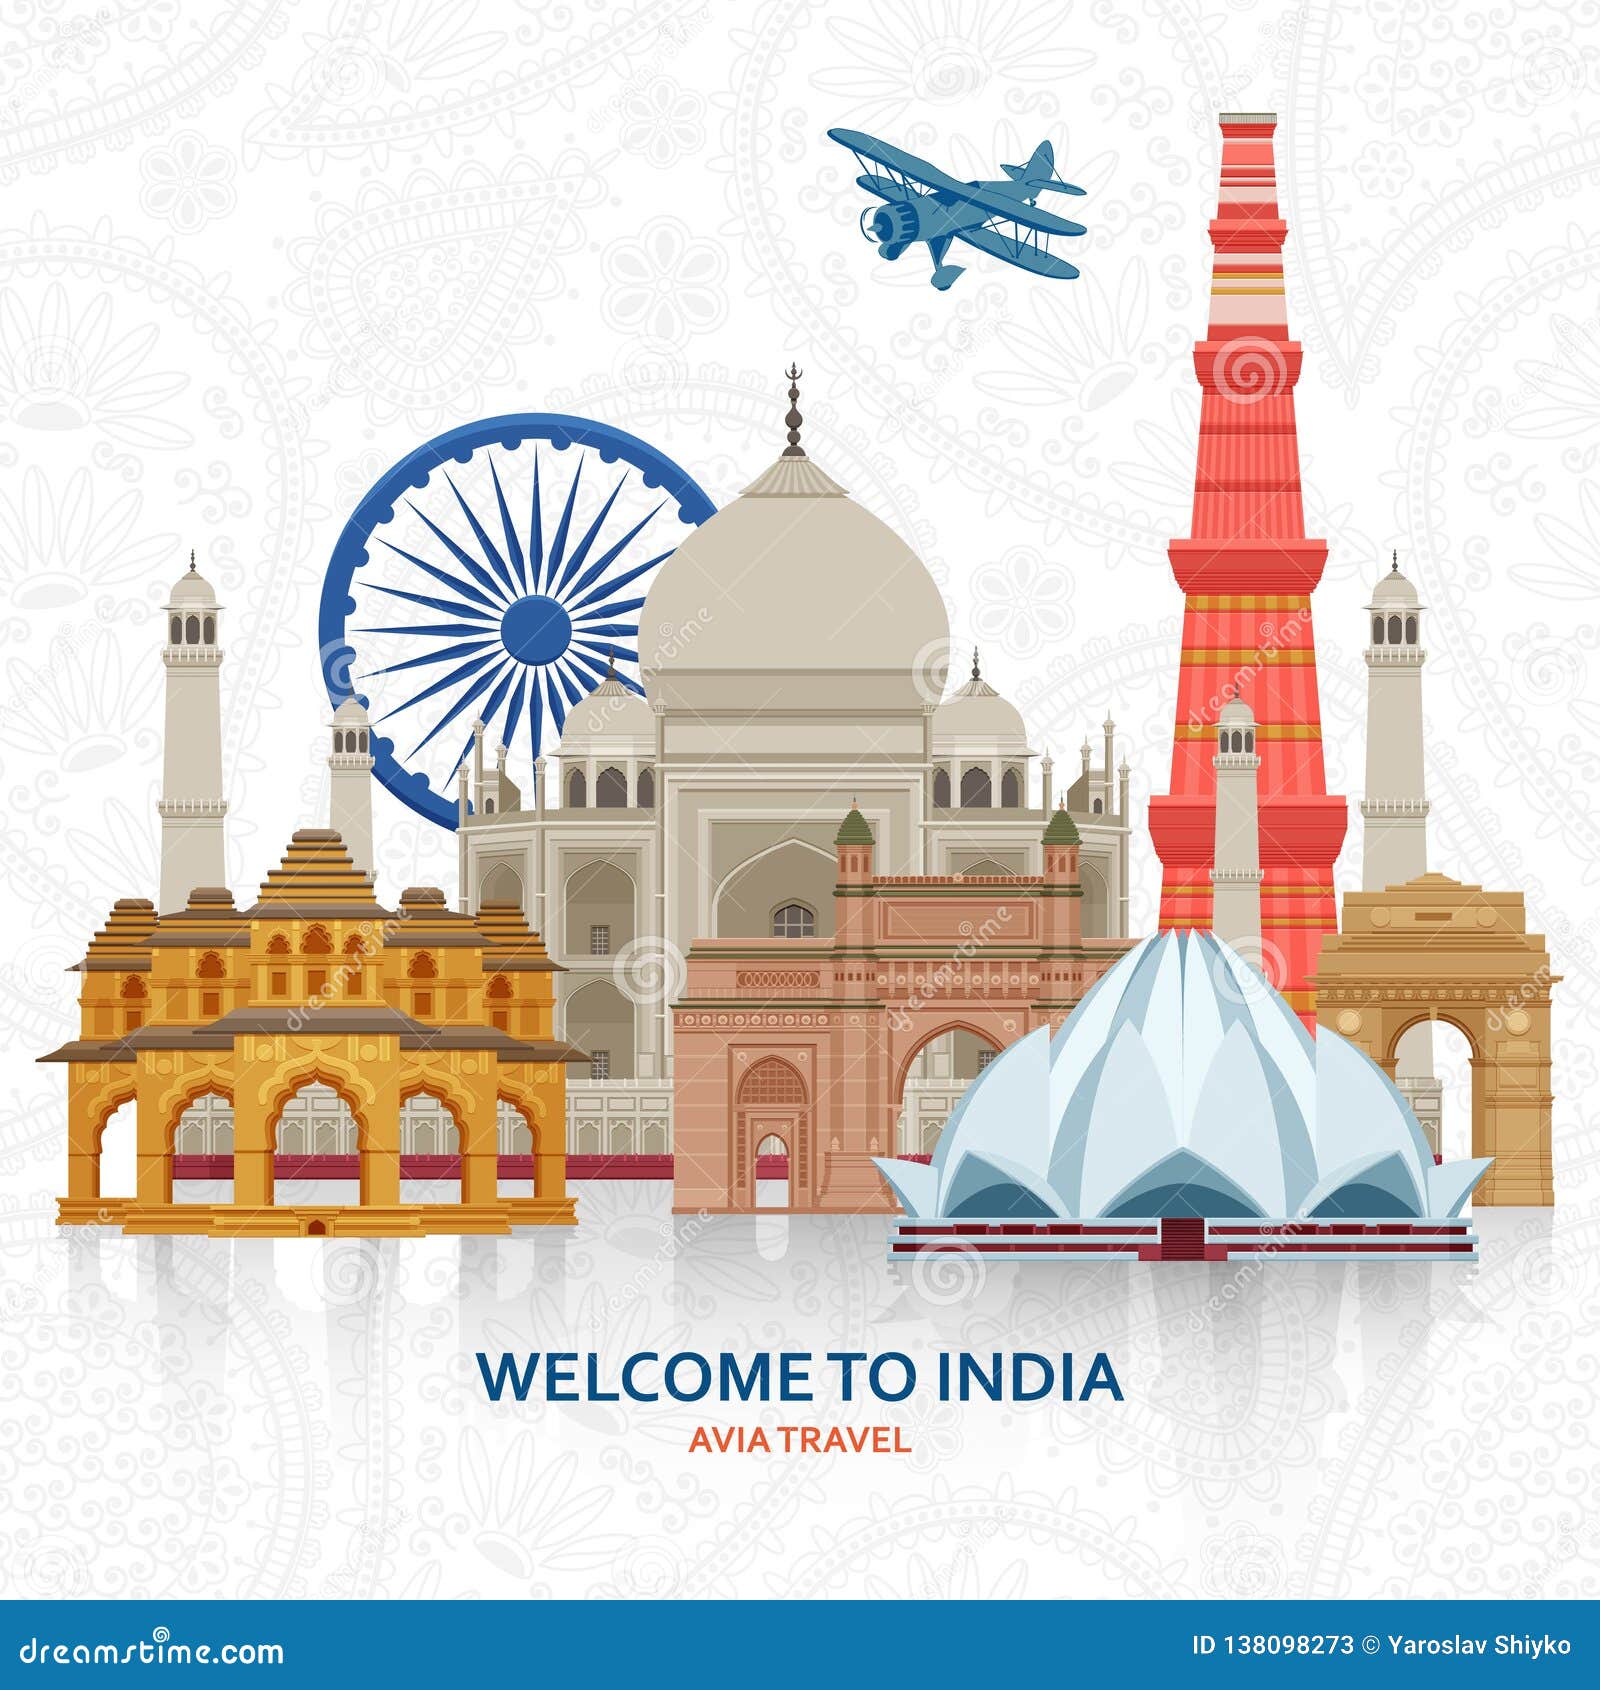 tourism of india growing global attraction drawing